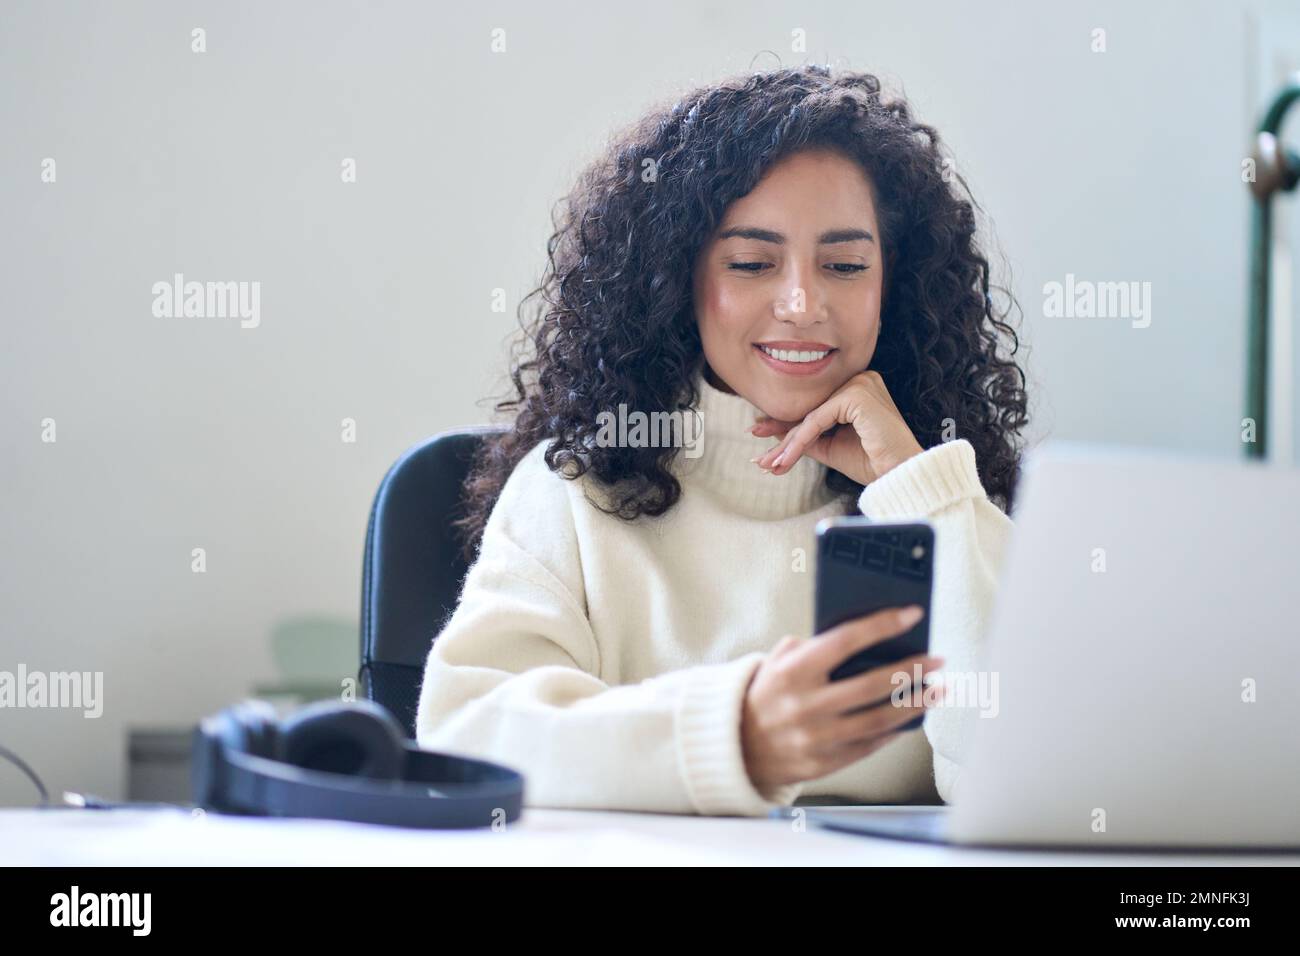 Young smiling latin business woman using phone in office sitting at desk. Stock Photo